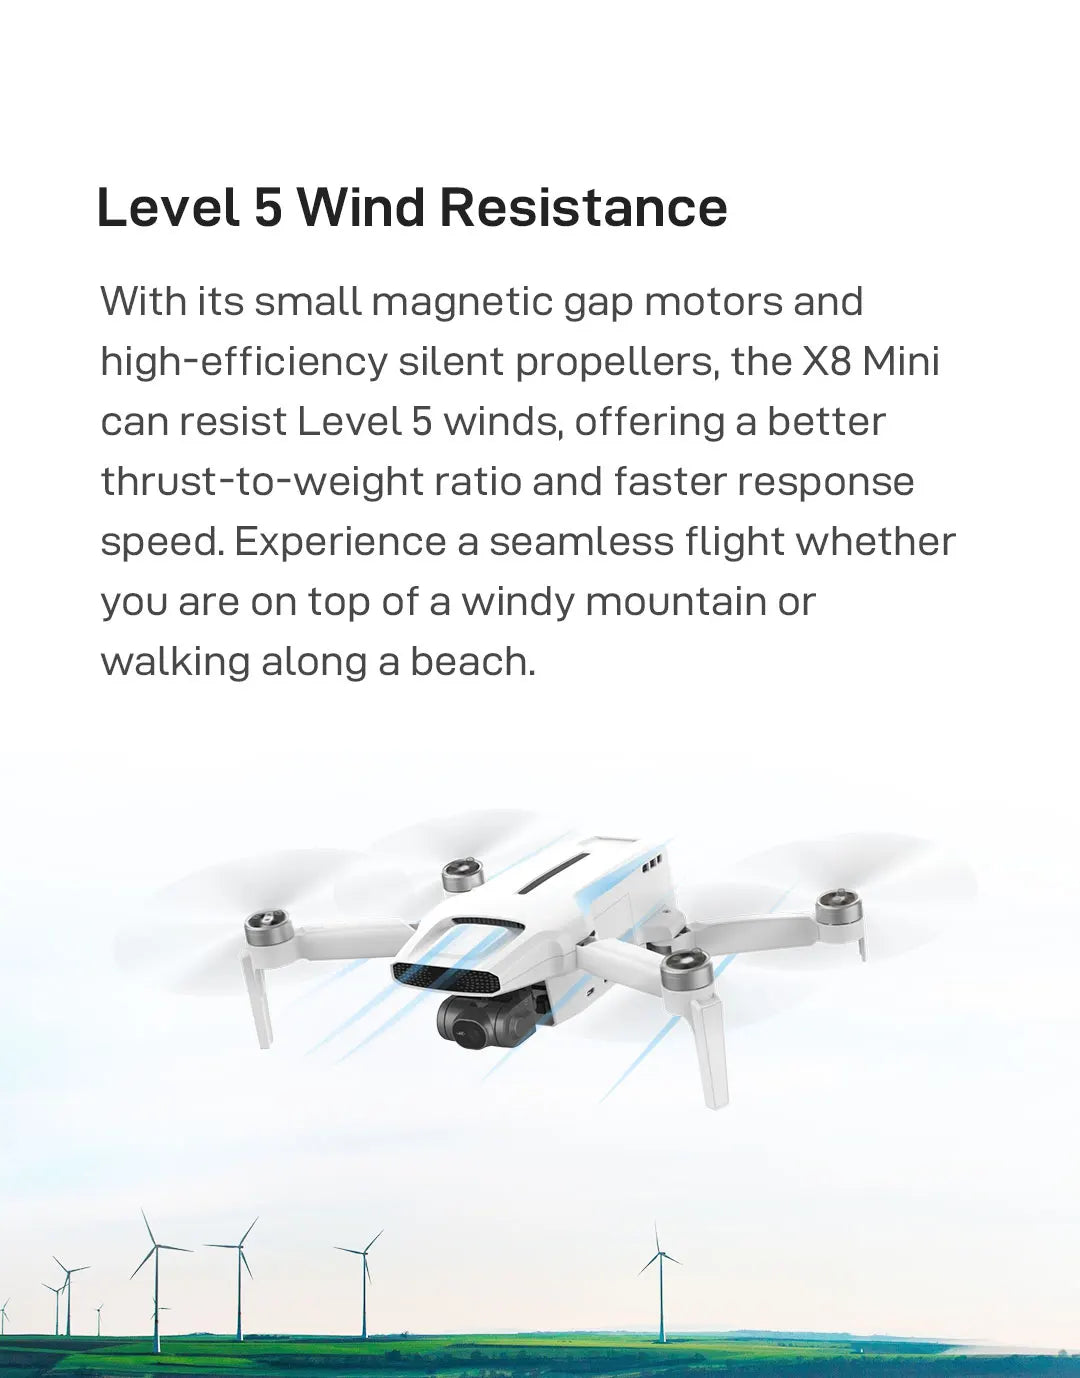 FIMI x8 Mini Pro Camera Drone, the X8 Mini can resist Level 5 winds; offering a better thrust-to-